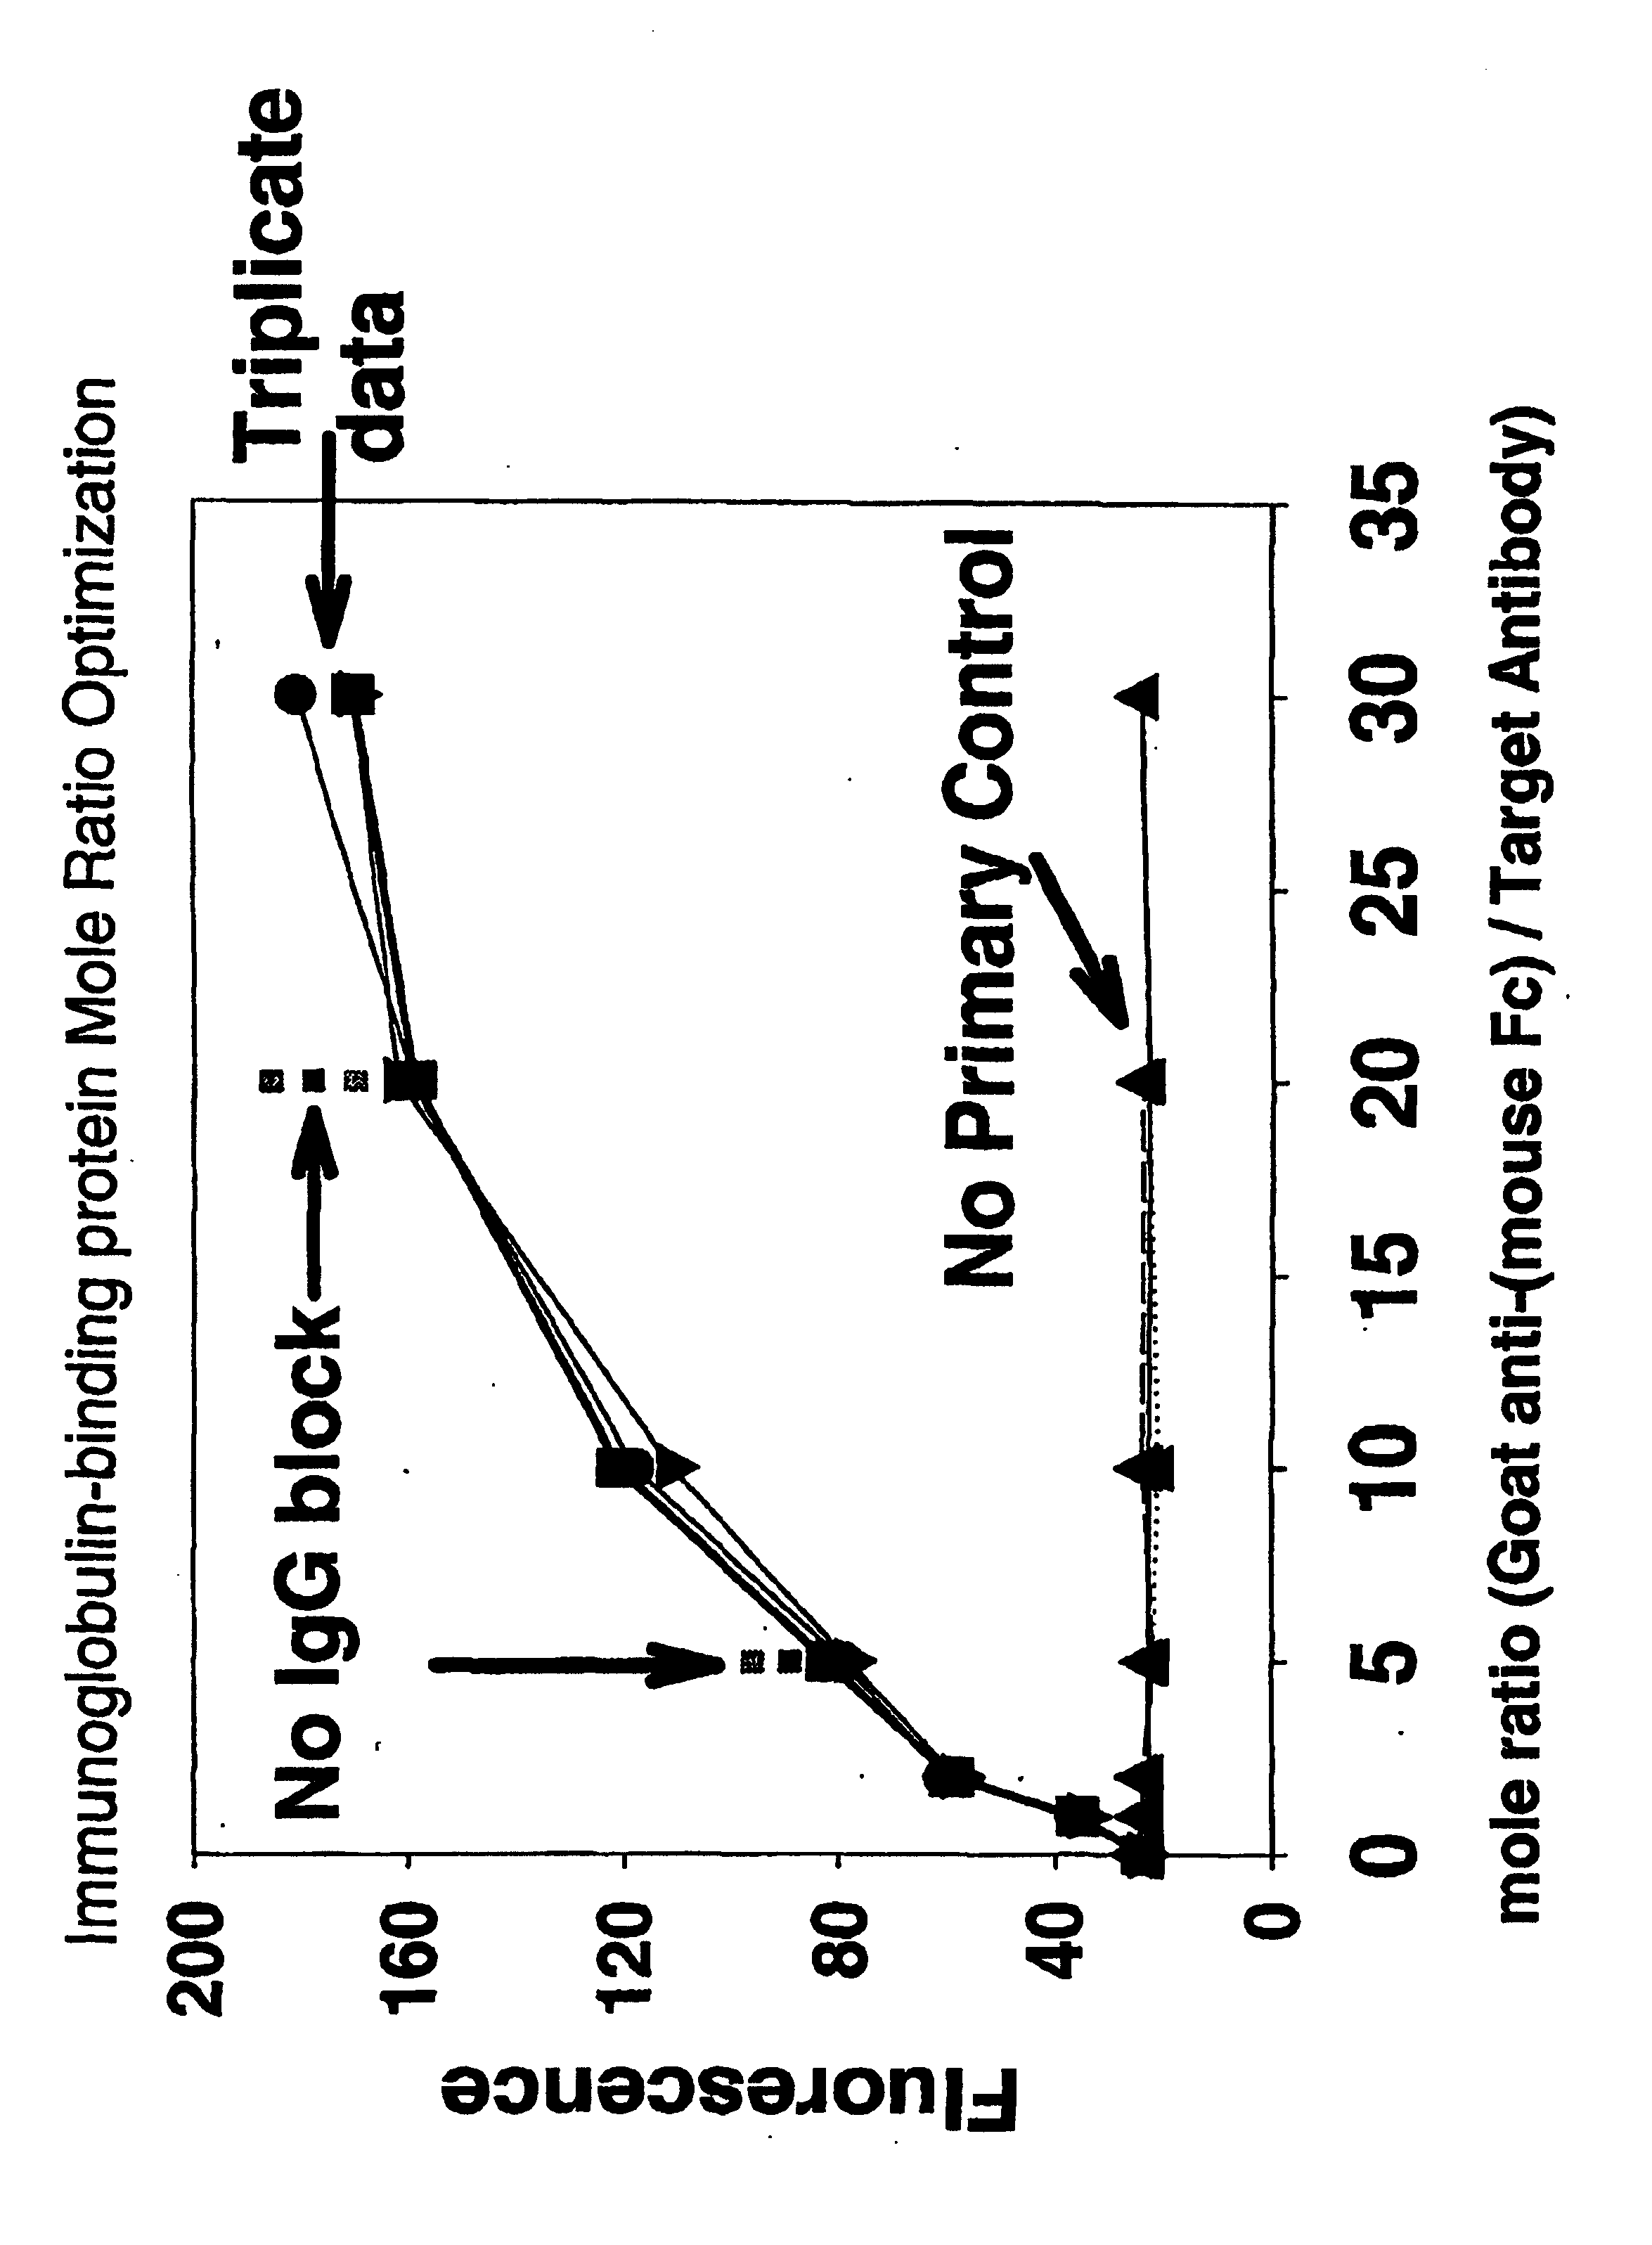 Antibody complexes and methods for immunolabeling